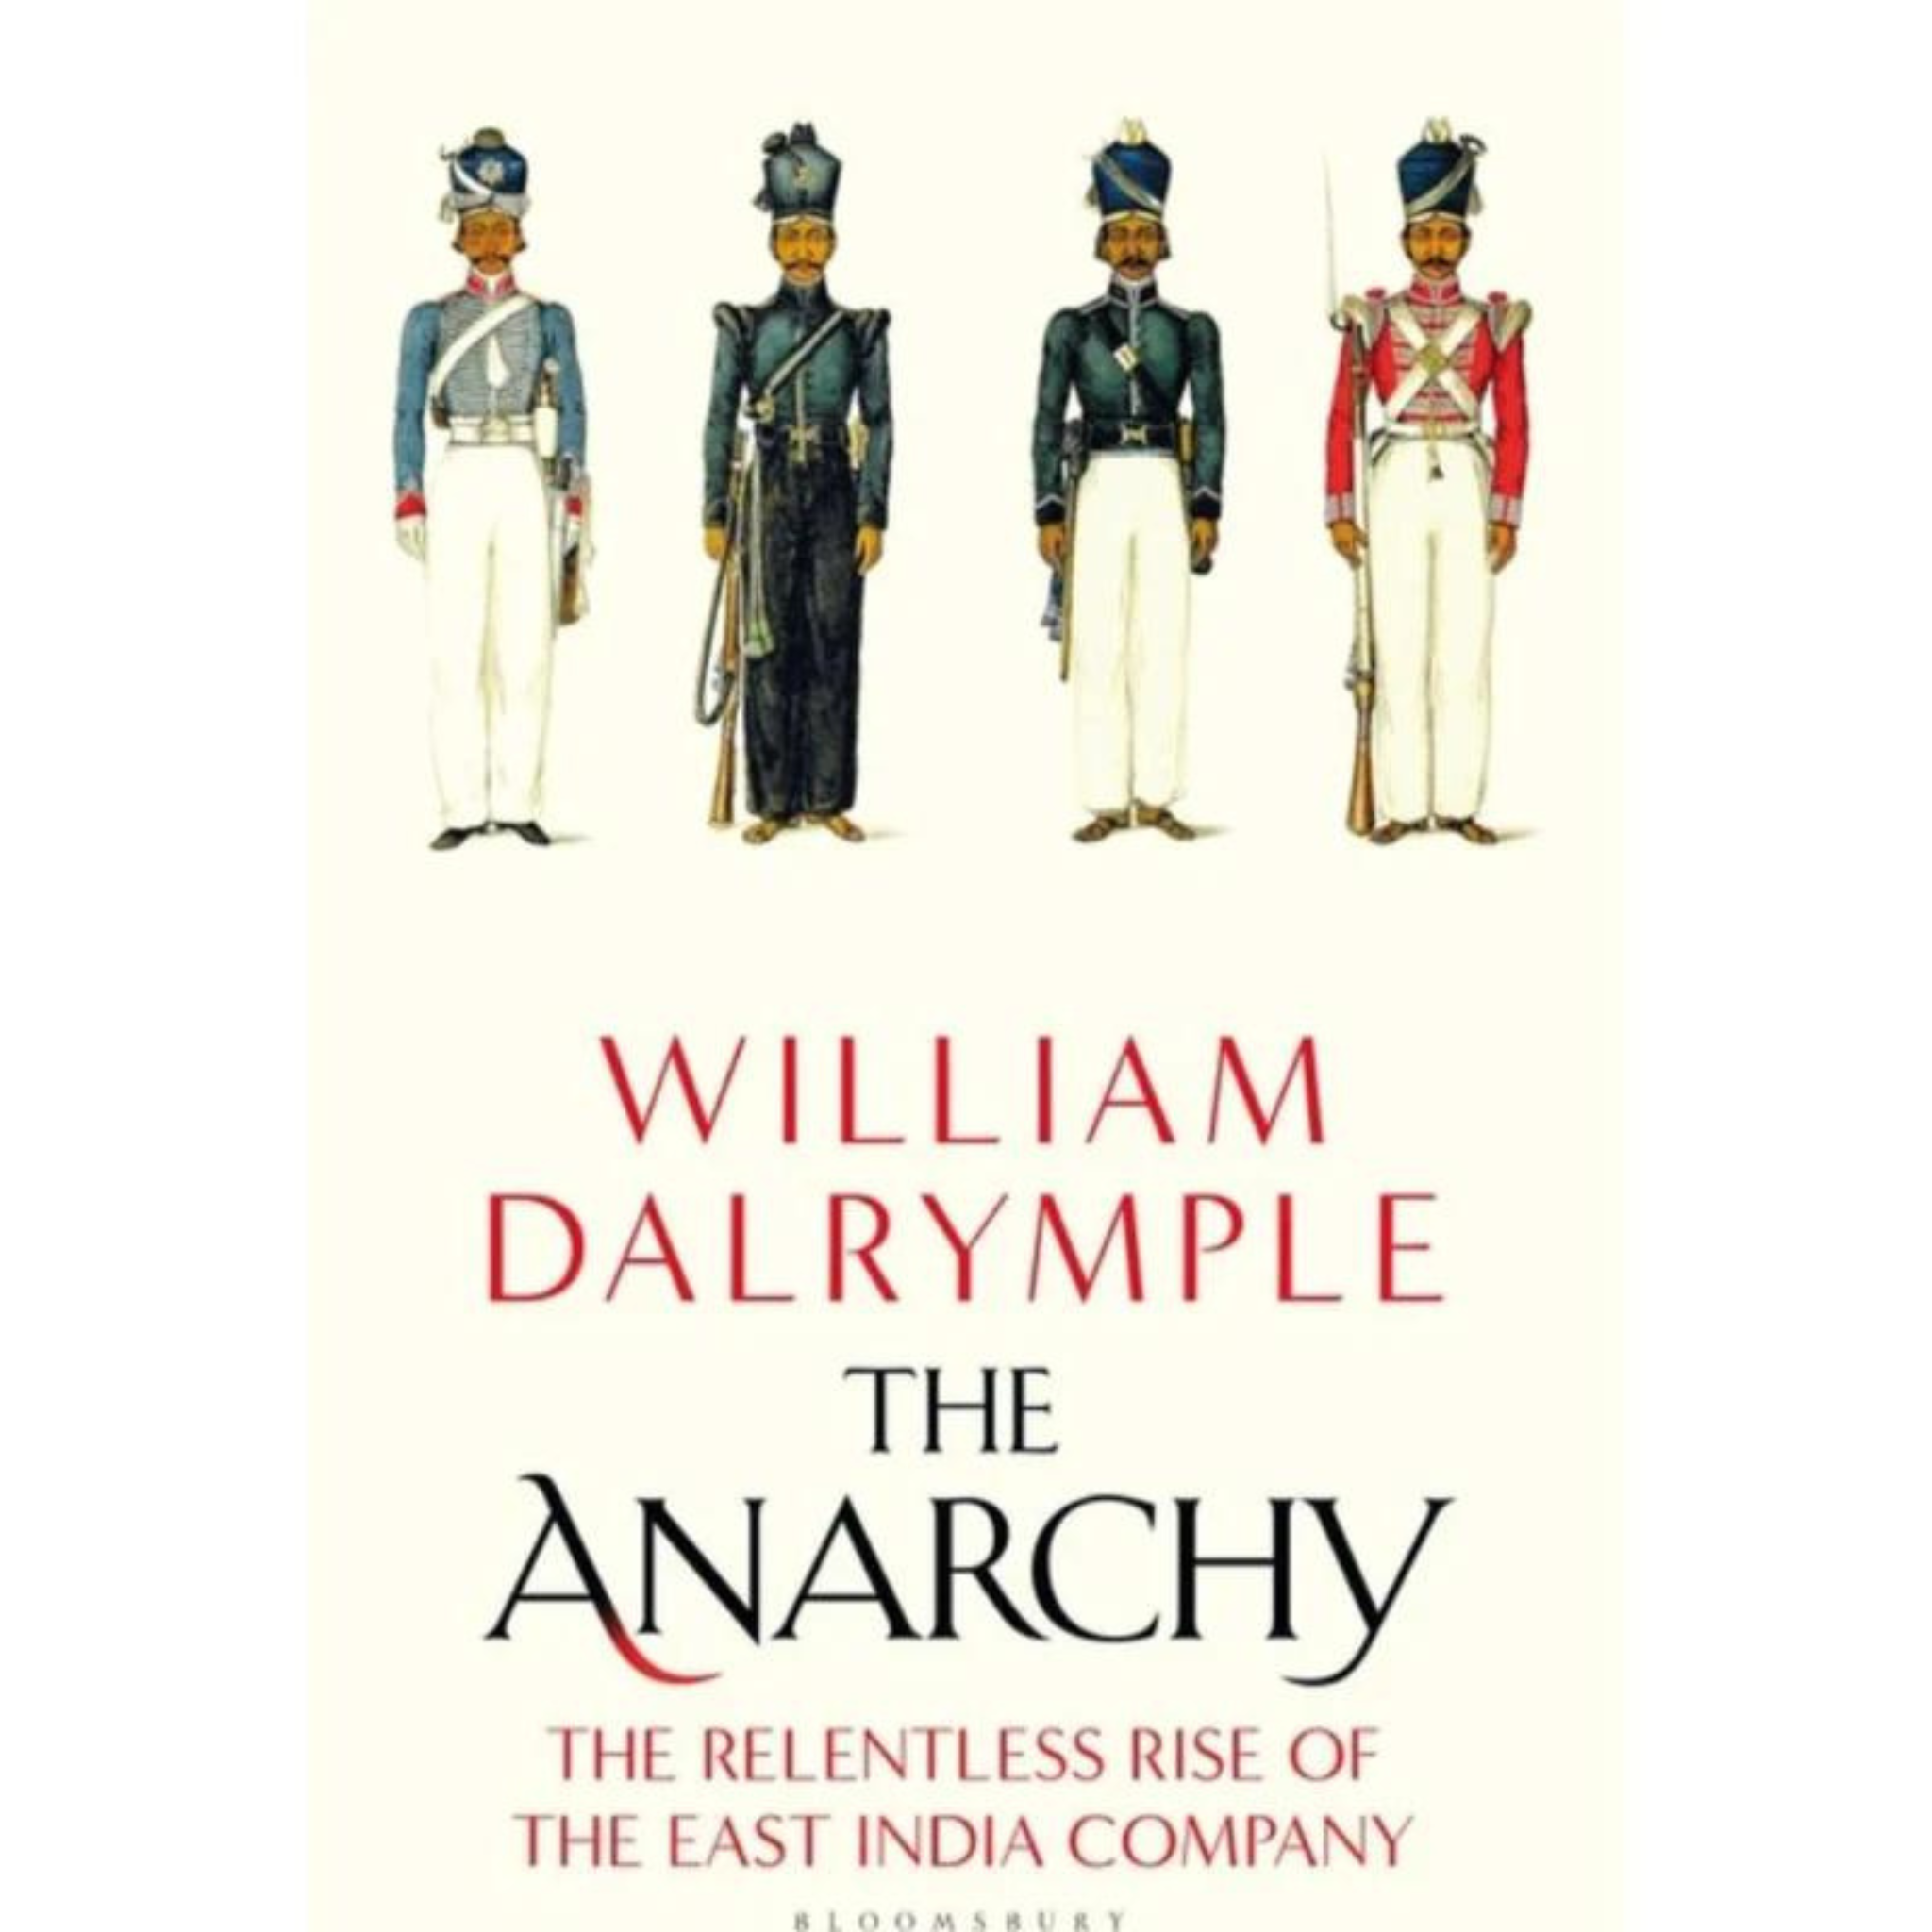 The Anarchy By WILLIAM DALRYMPLE